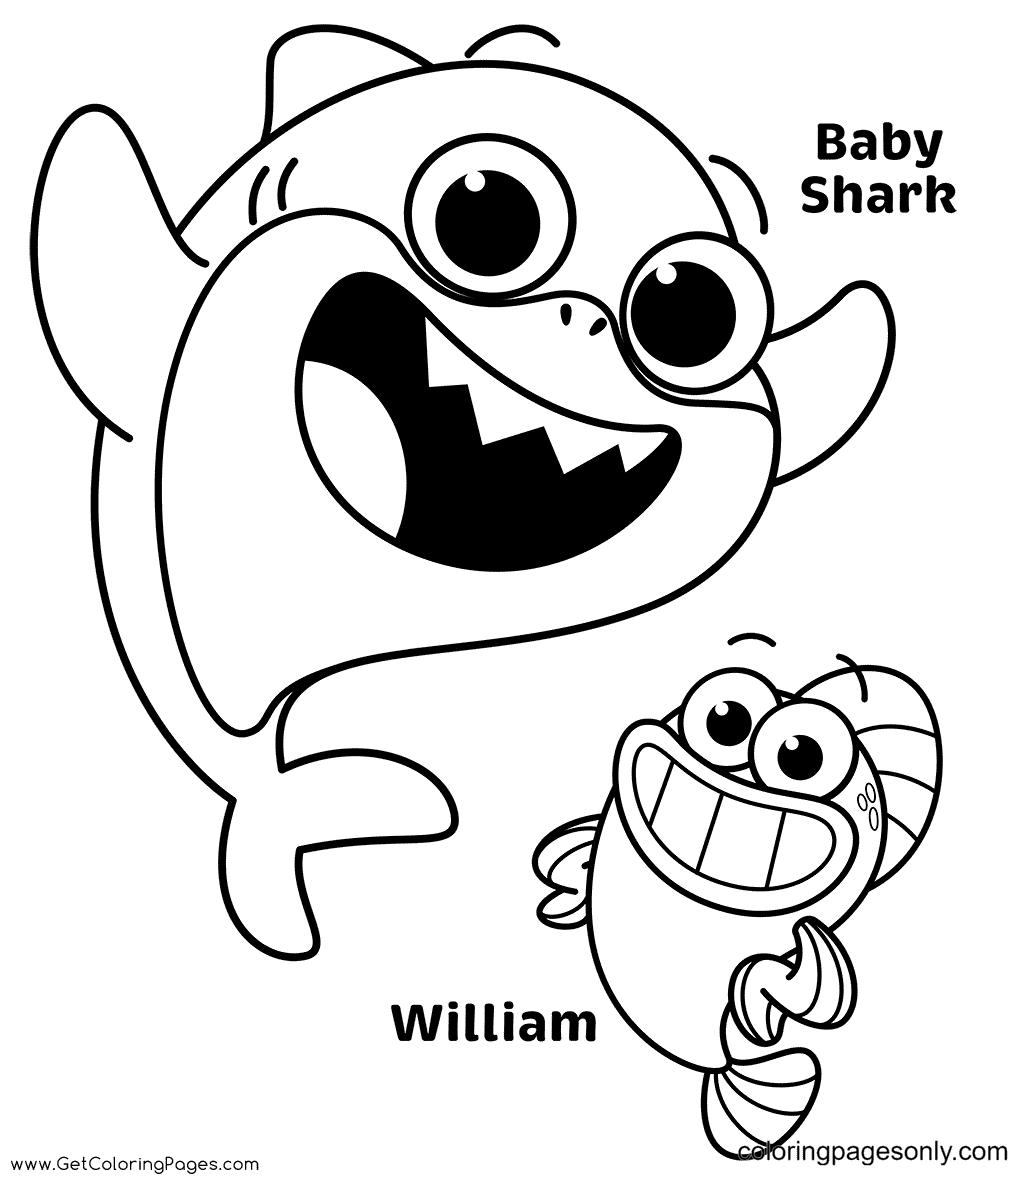 Baby Shark and William Coloring Pages